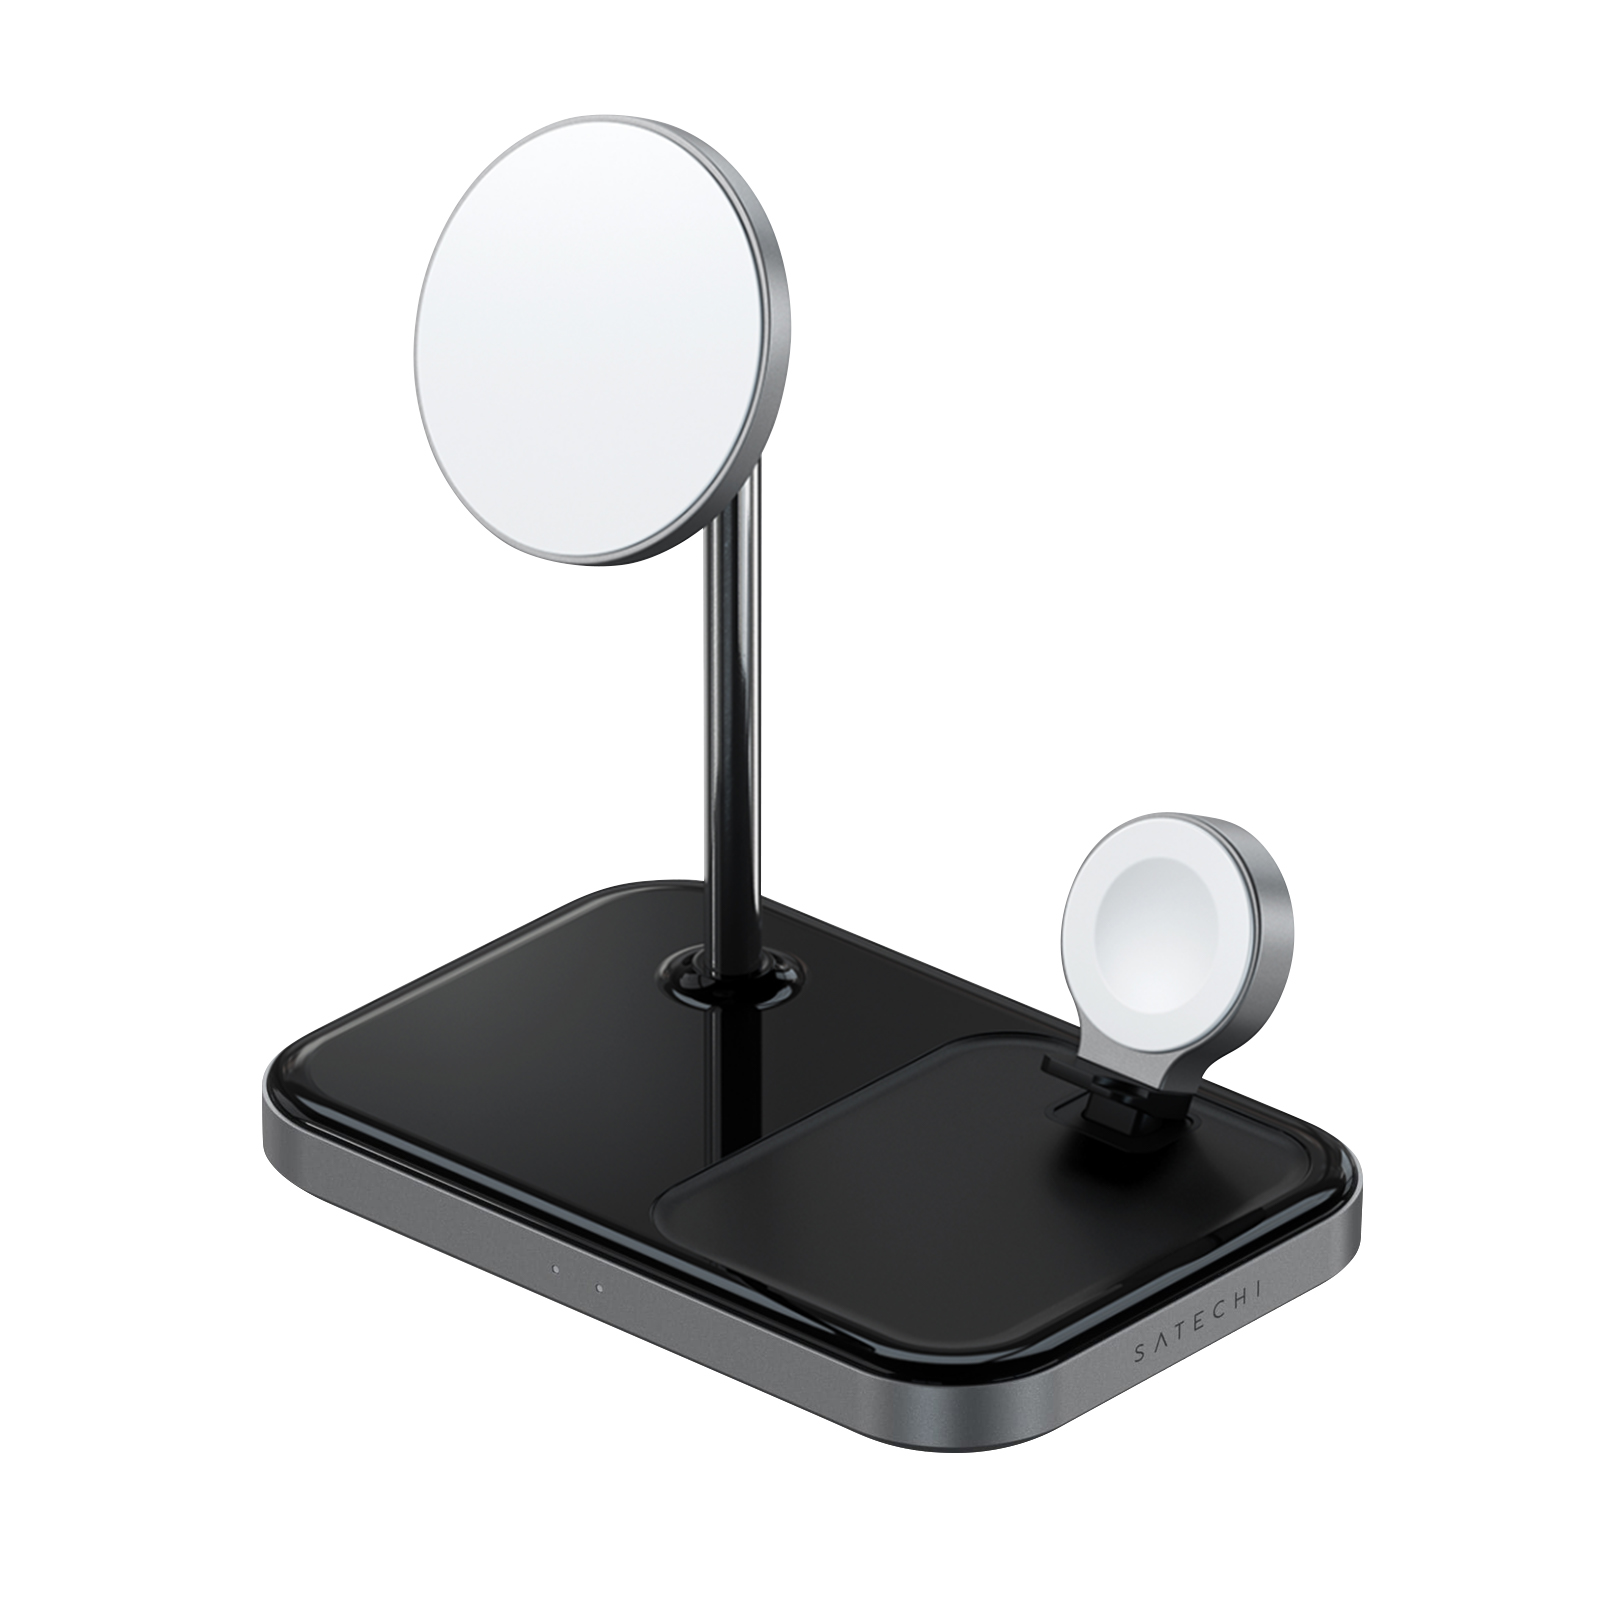 SATECHI 3-in-1 Magnetic Wireless Charging Stand Wireless Satechi, Charger Nero